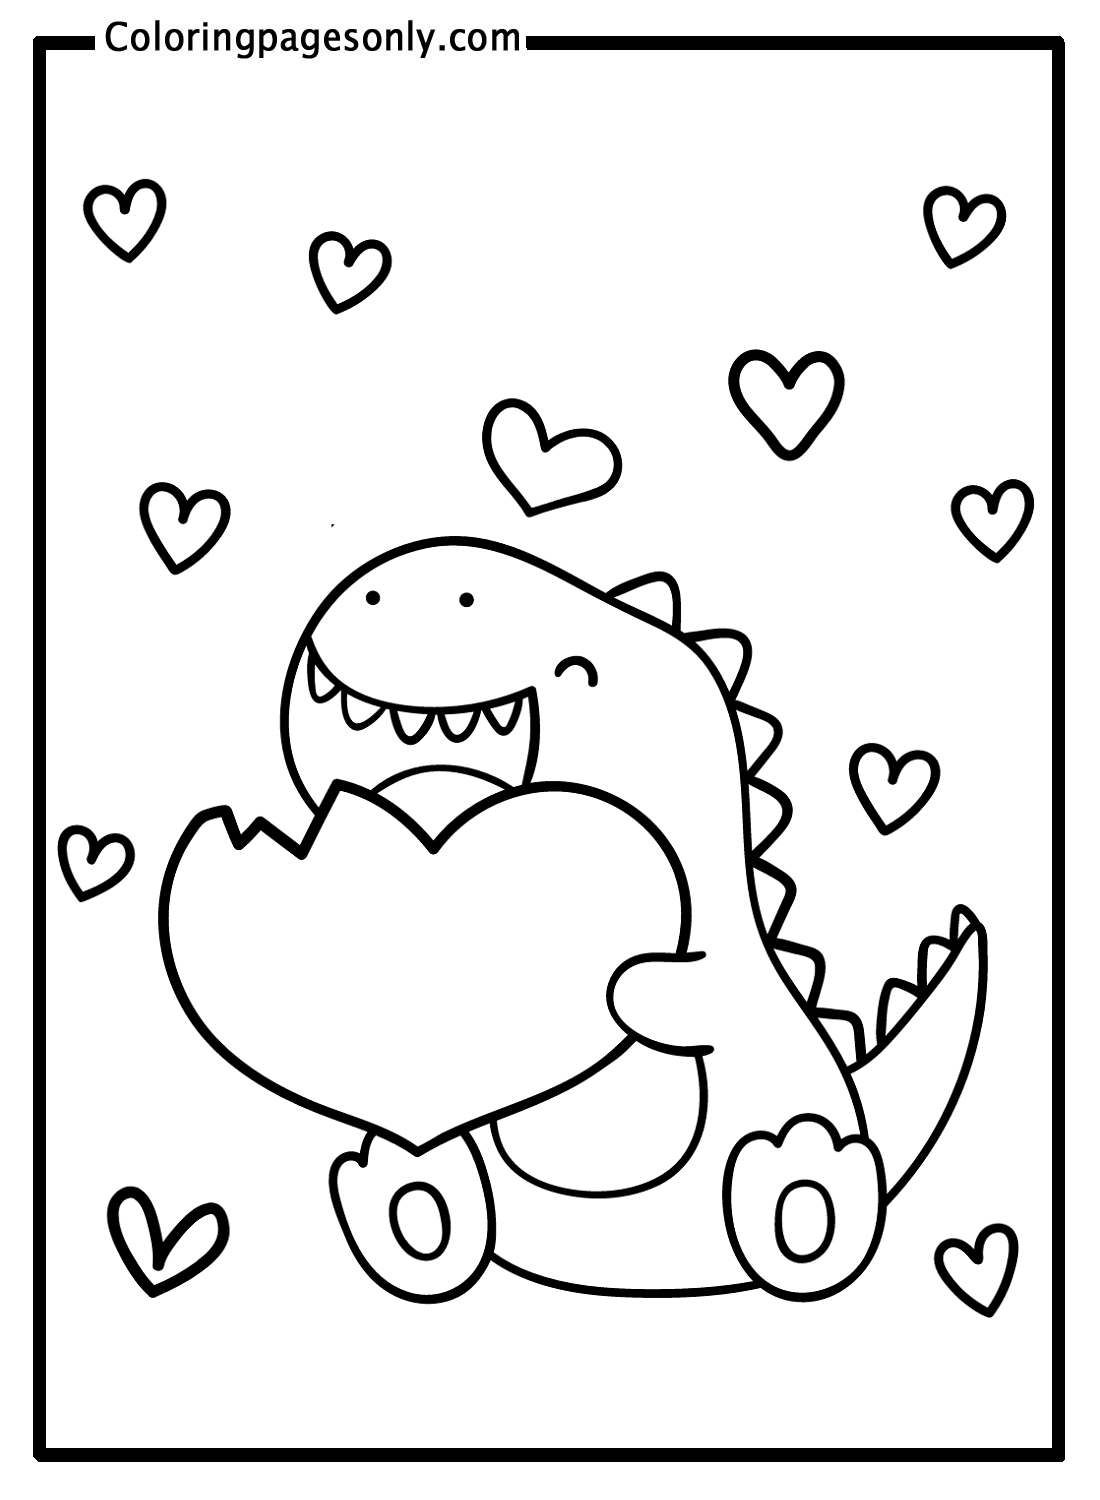 Dinosaur With Heart Coloring Pages